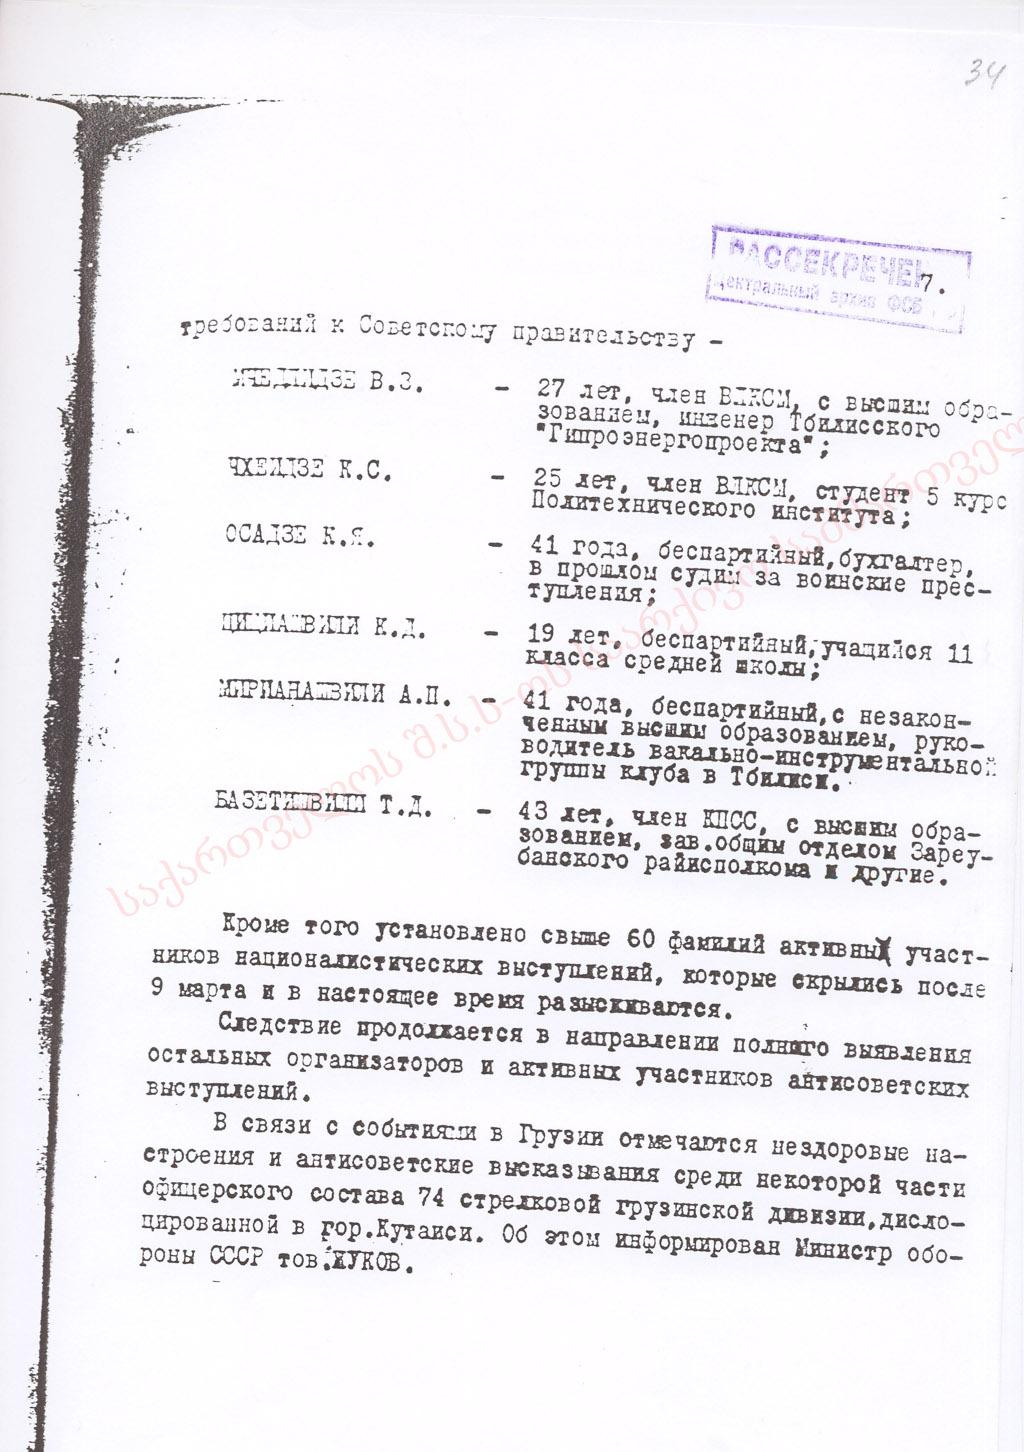 Information regarding the increase of civil displeasure caused by the 20th Party Congress is described in atop secret report the Army General I. Serov, the Chairman of the Committee for State Security at the Council of Ministers of USSR addressed to the Central Committee of Communist Party of the USSR. Chronology of the events developing in Georgia during March 4-10th is provided in the document.